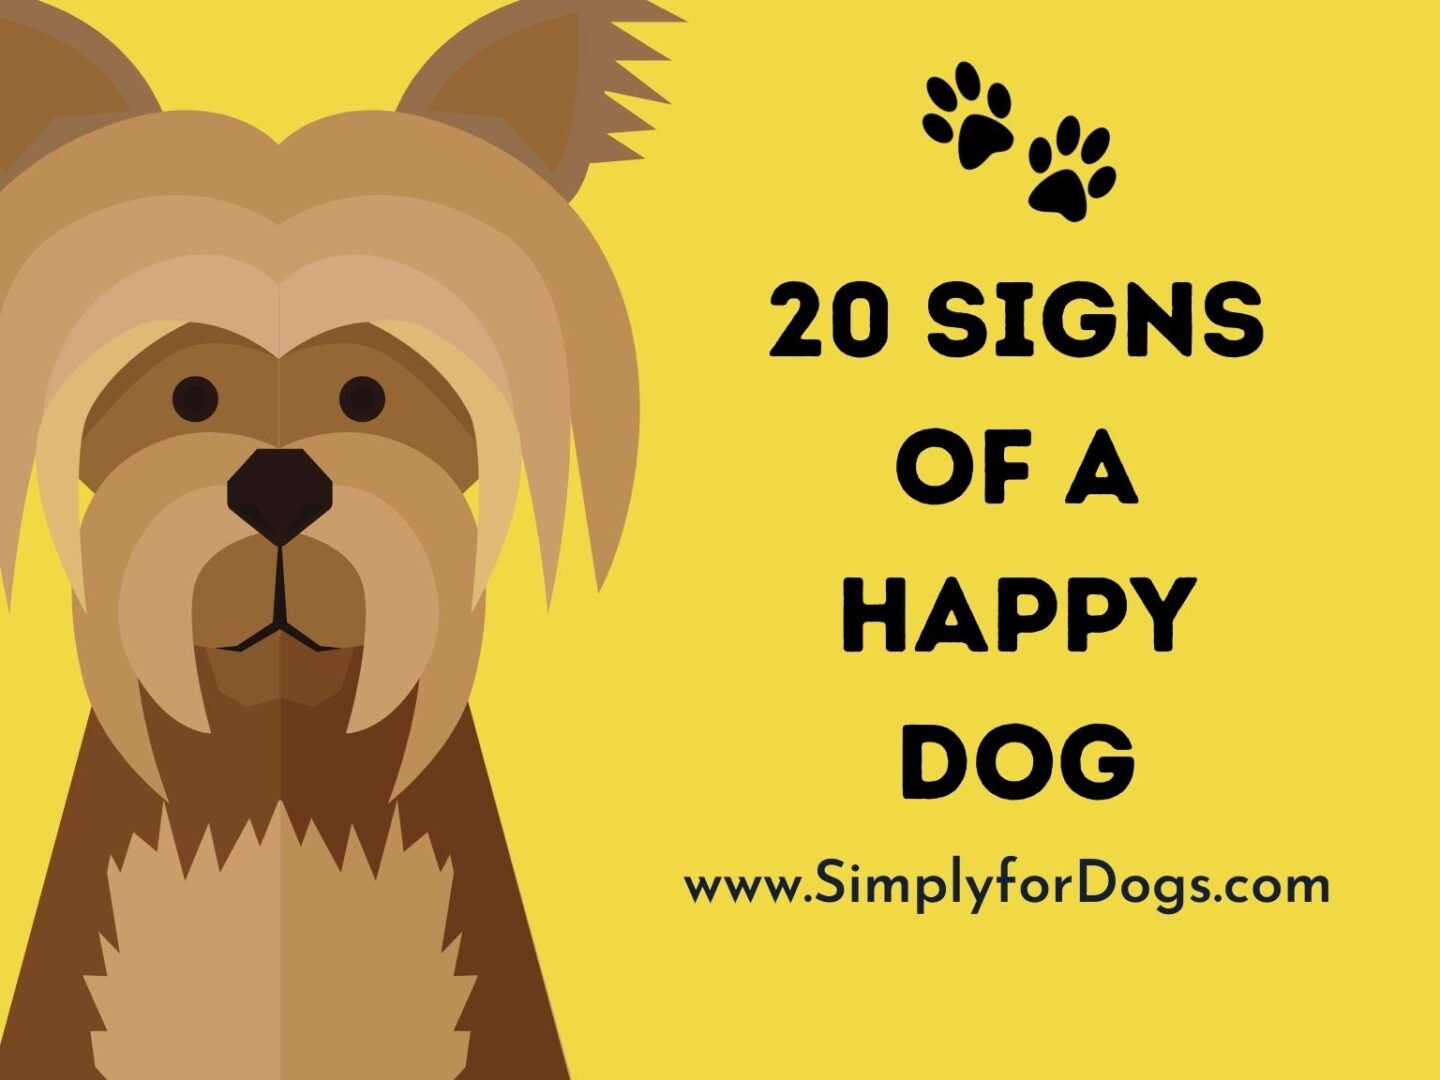 20 Signs of a Happy Dog